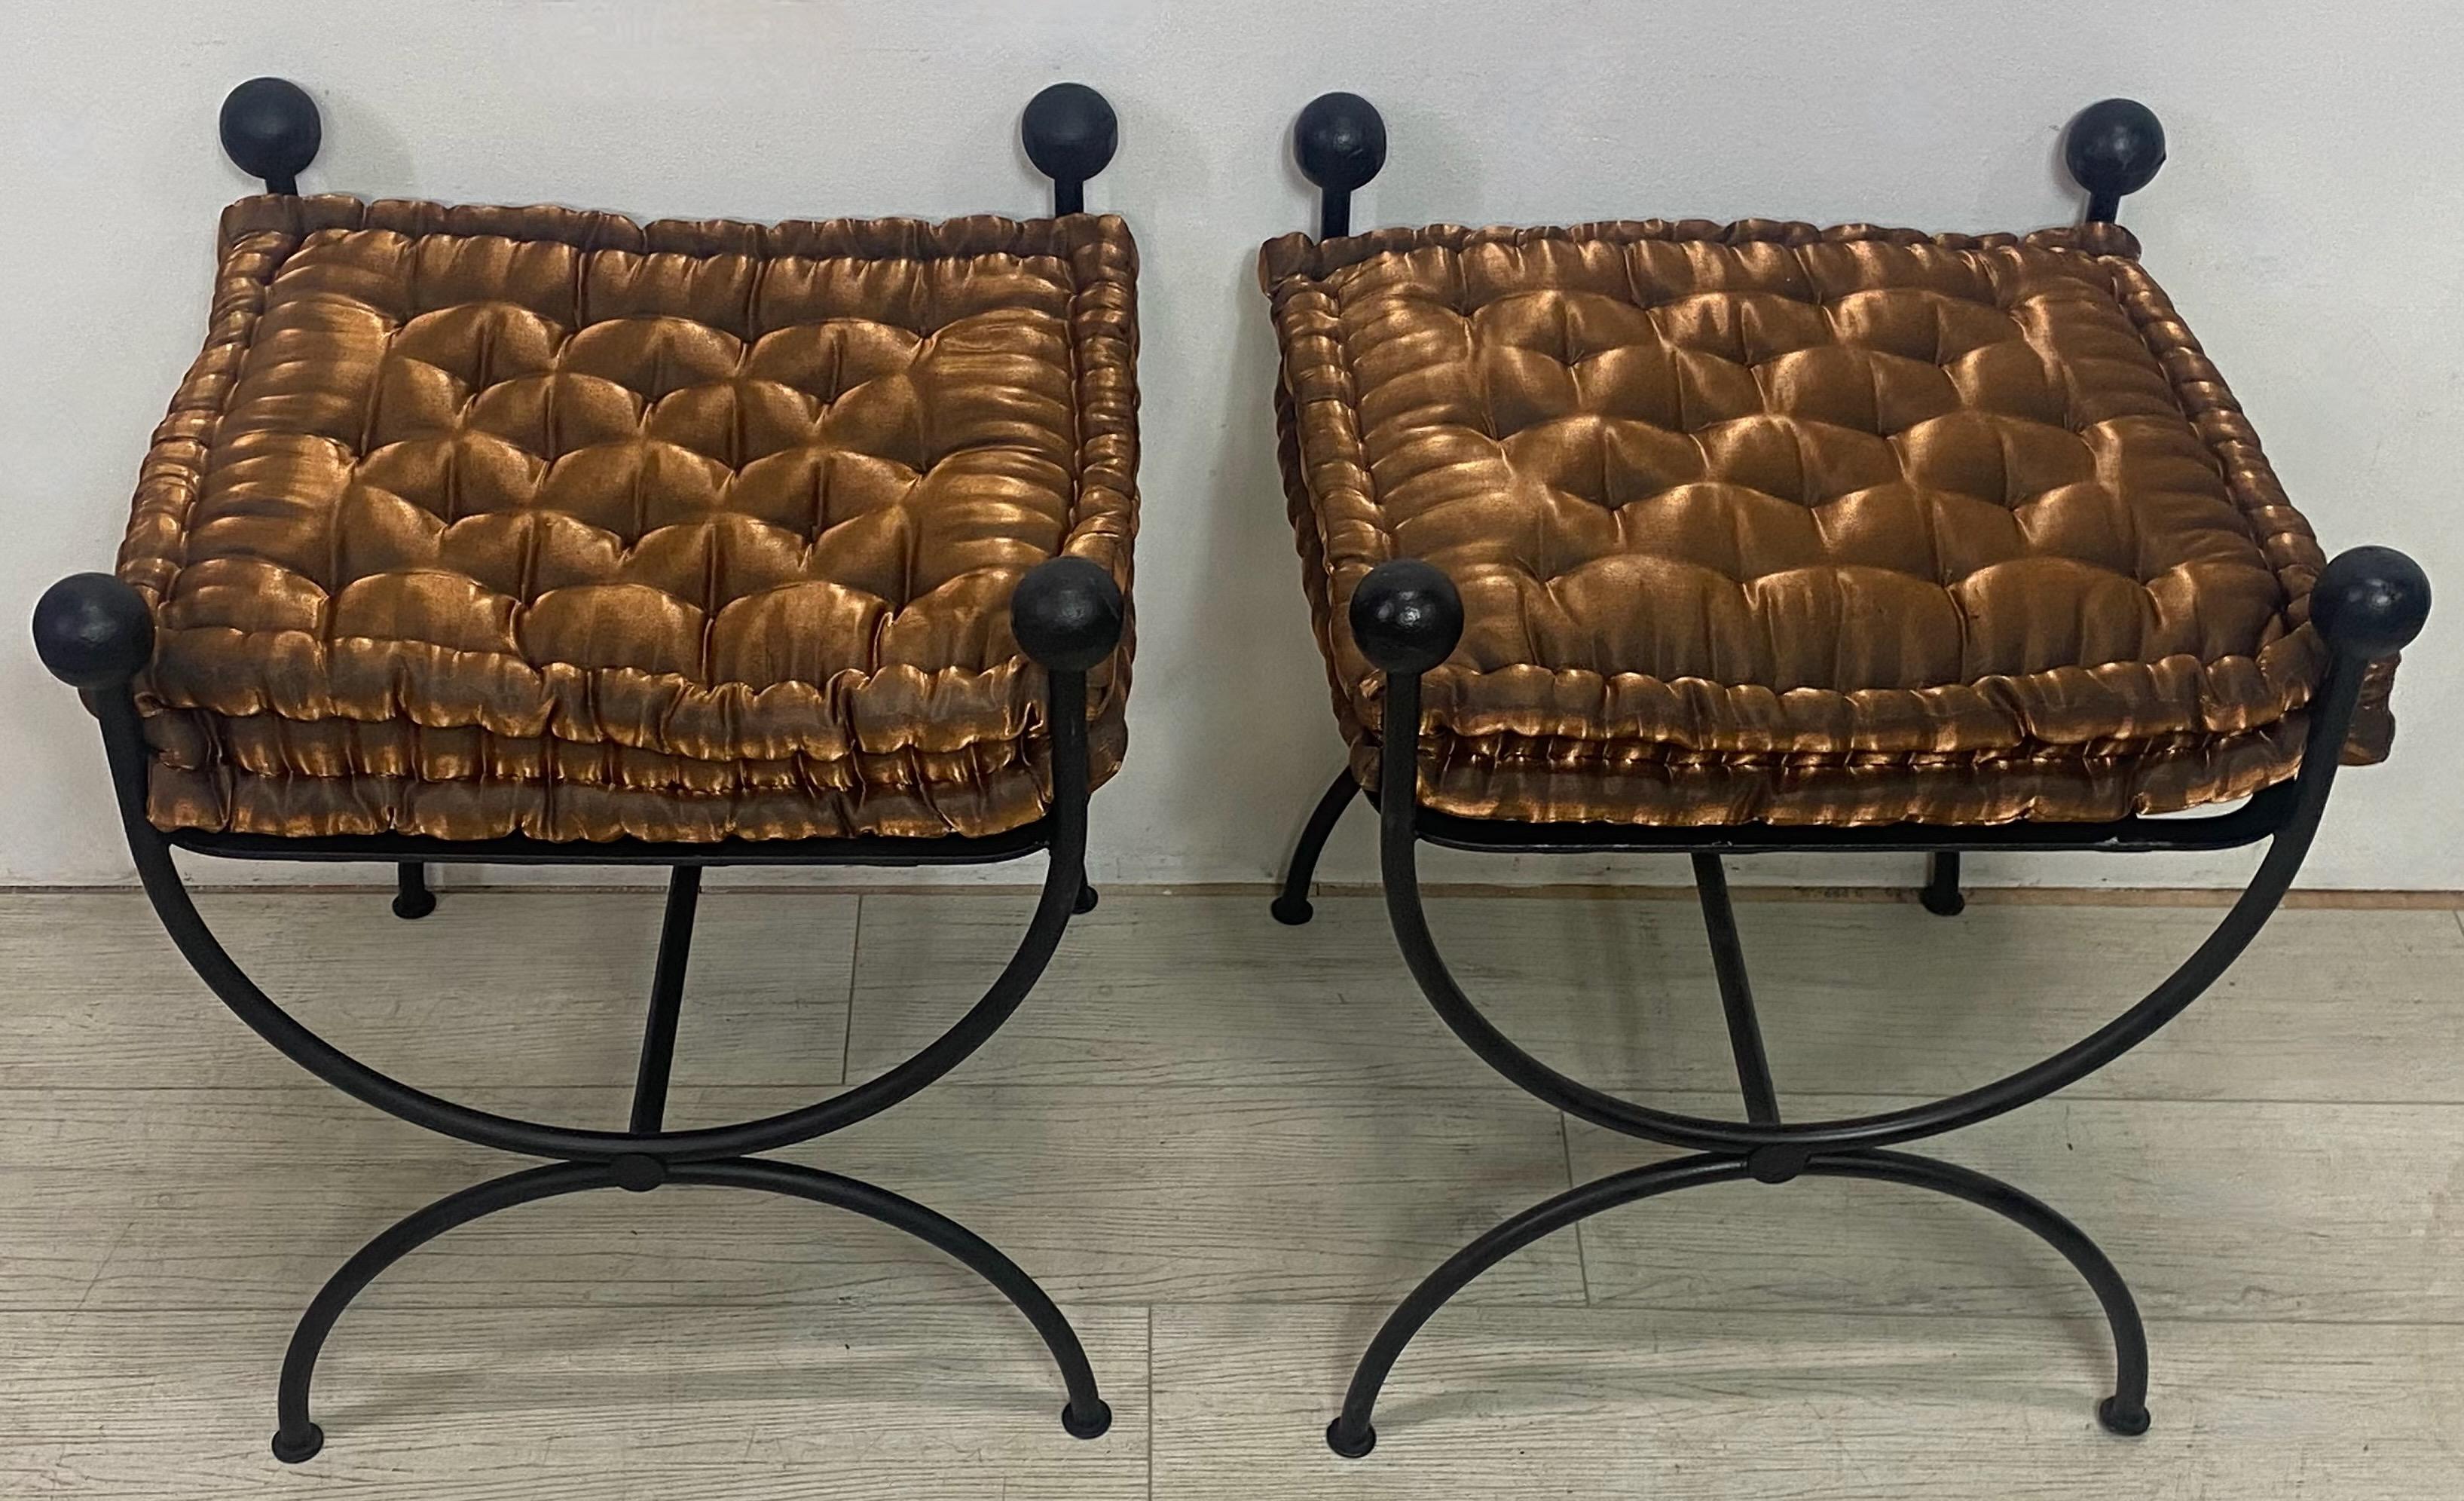 20th Century Pair of Mid-Century Upholstered Iron Stools or Benches